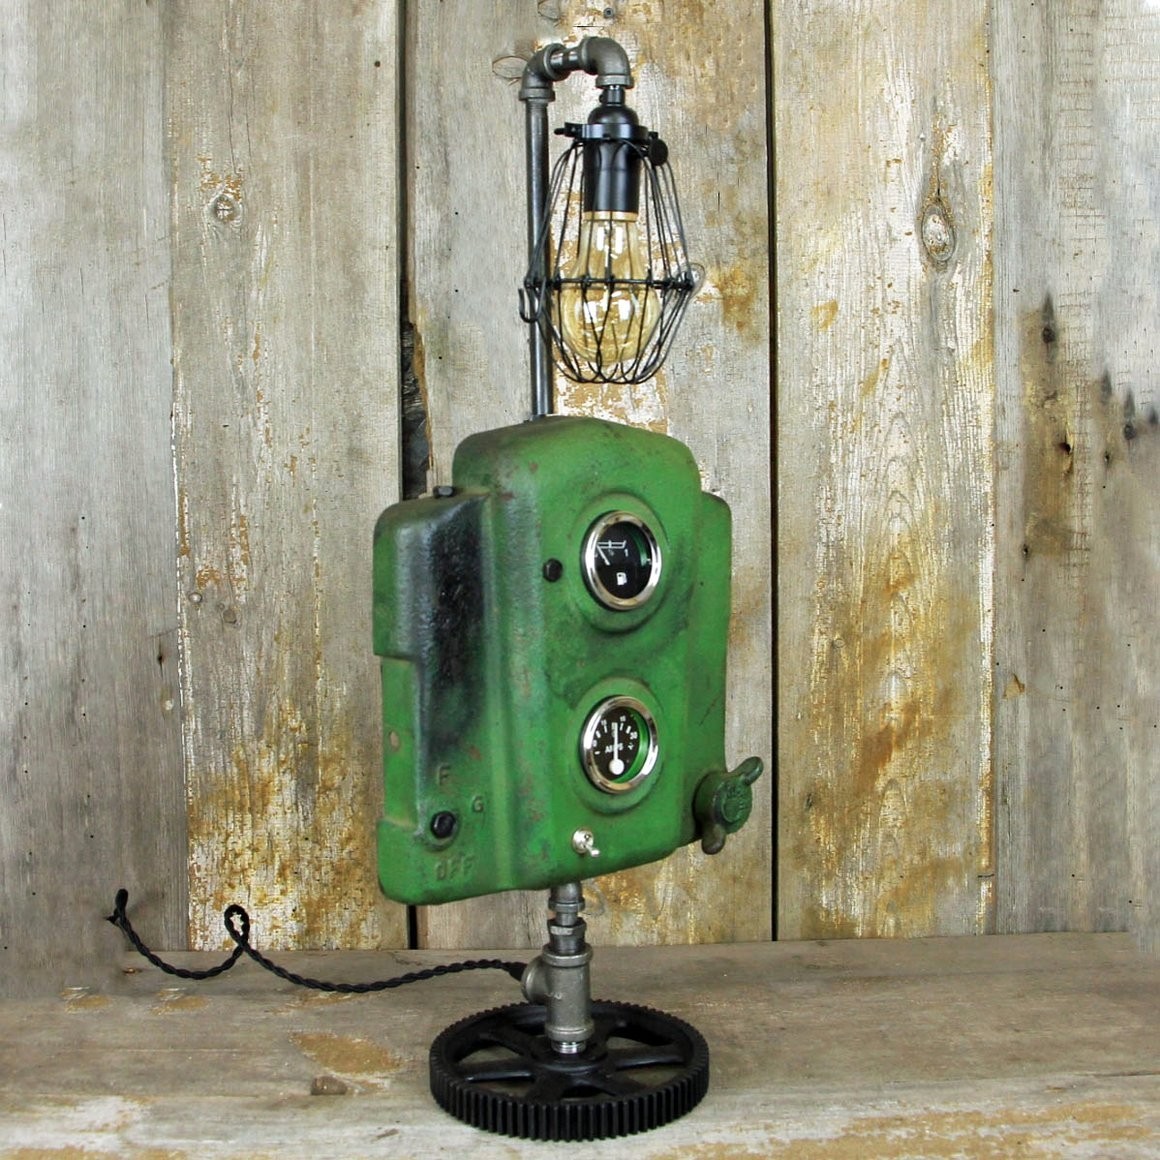 John deere plus steampunk equals a great industrial table